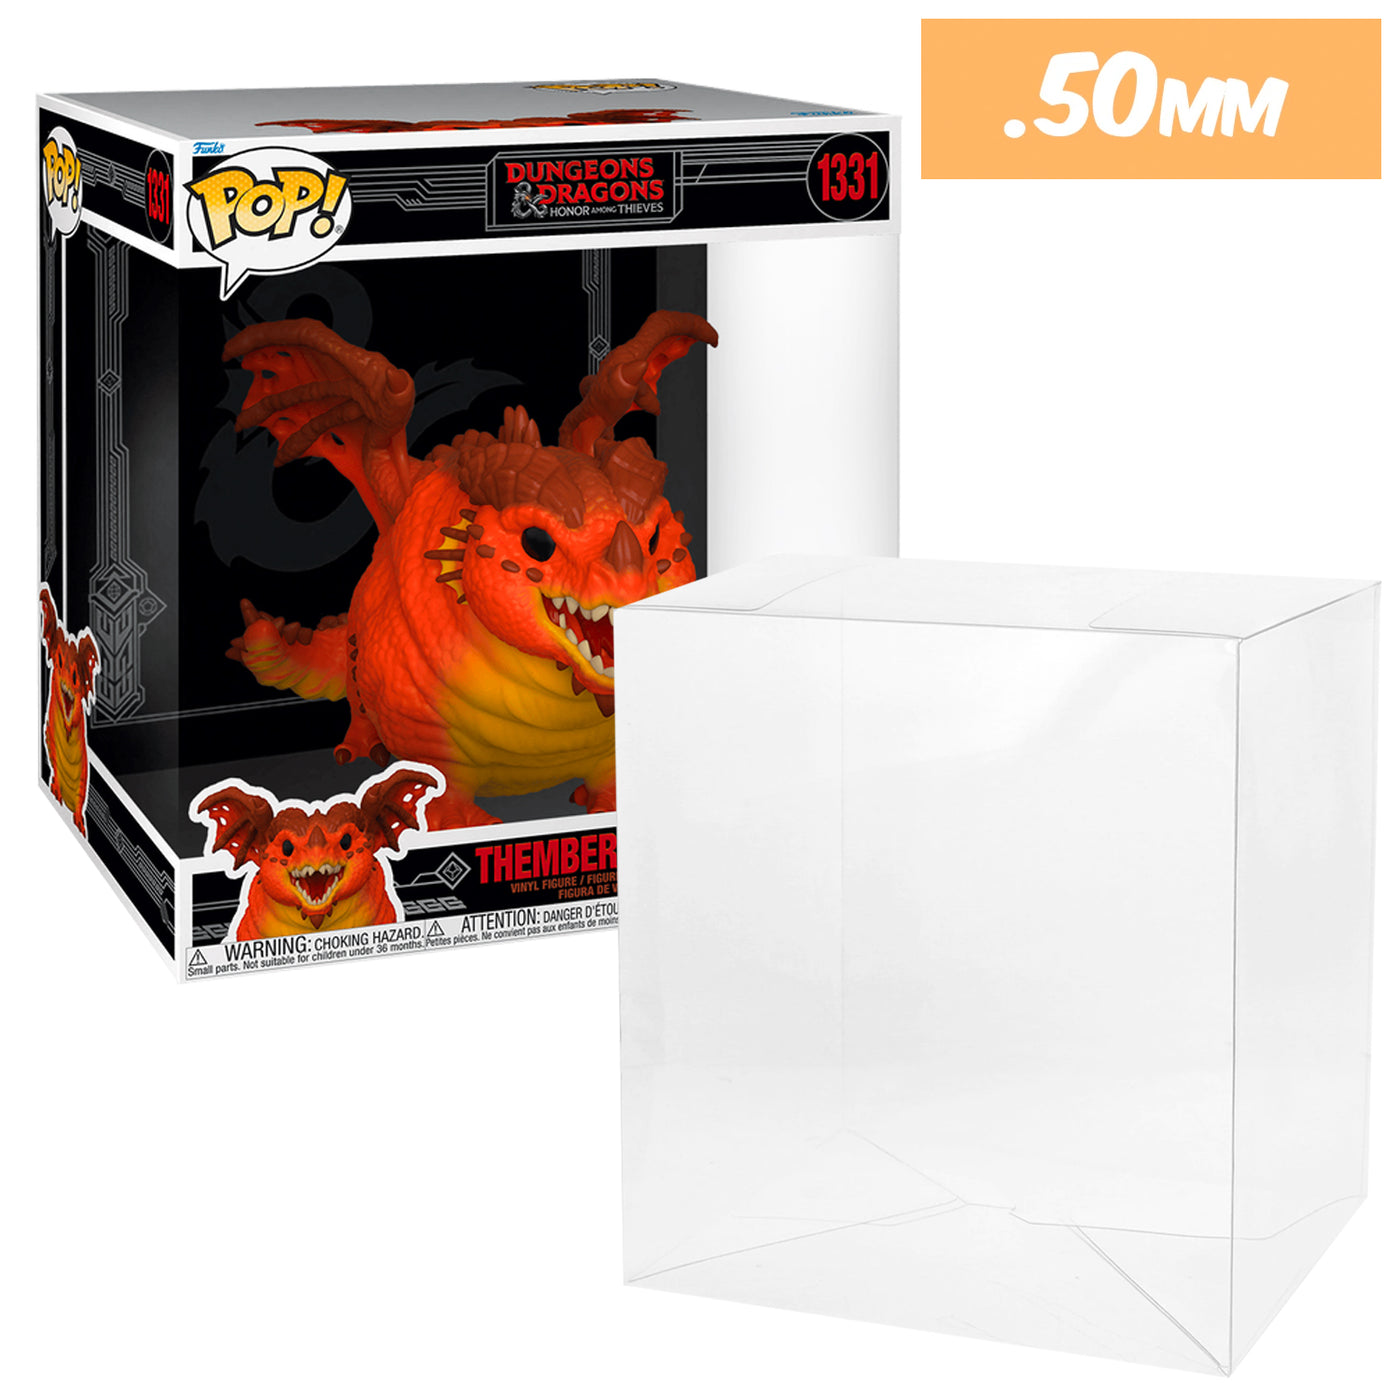 10 inch wide new size themberchaud best funko pop protectors thick strong uv scratch flat top stack vinyl display geek plastic shield vaulted eco armor fits collect protect display case kollector protector